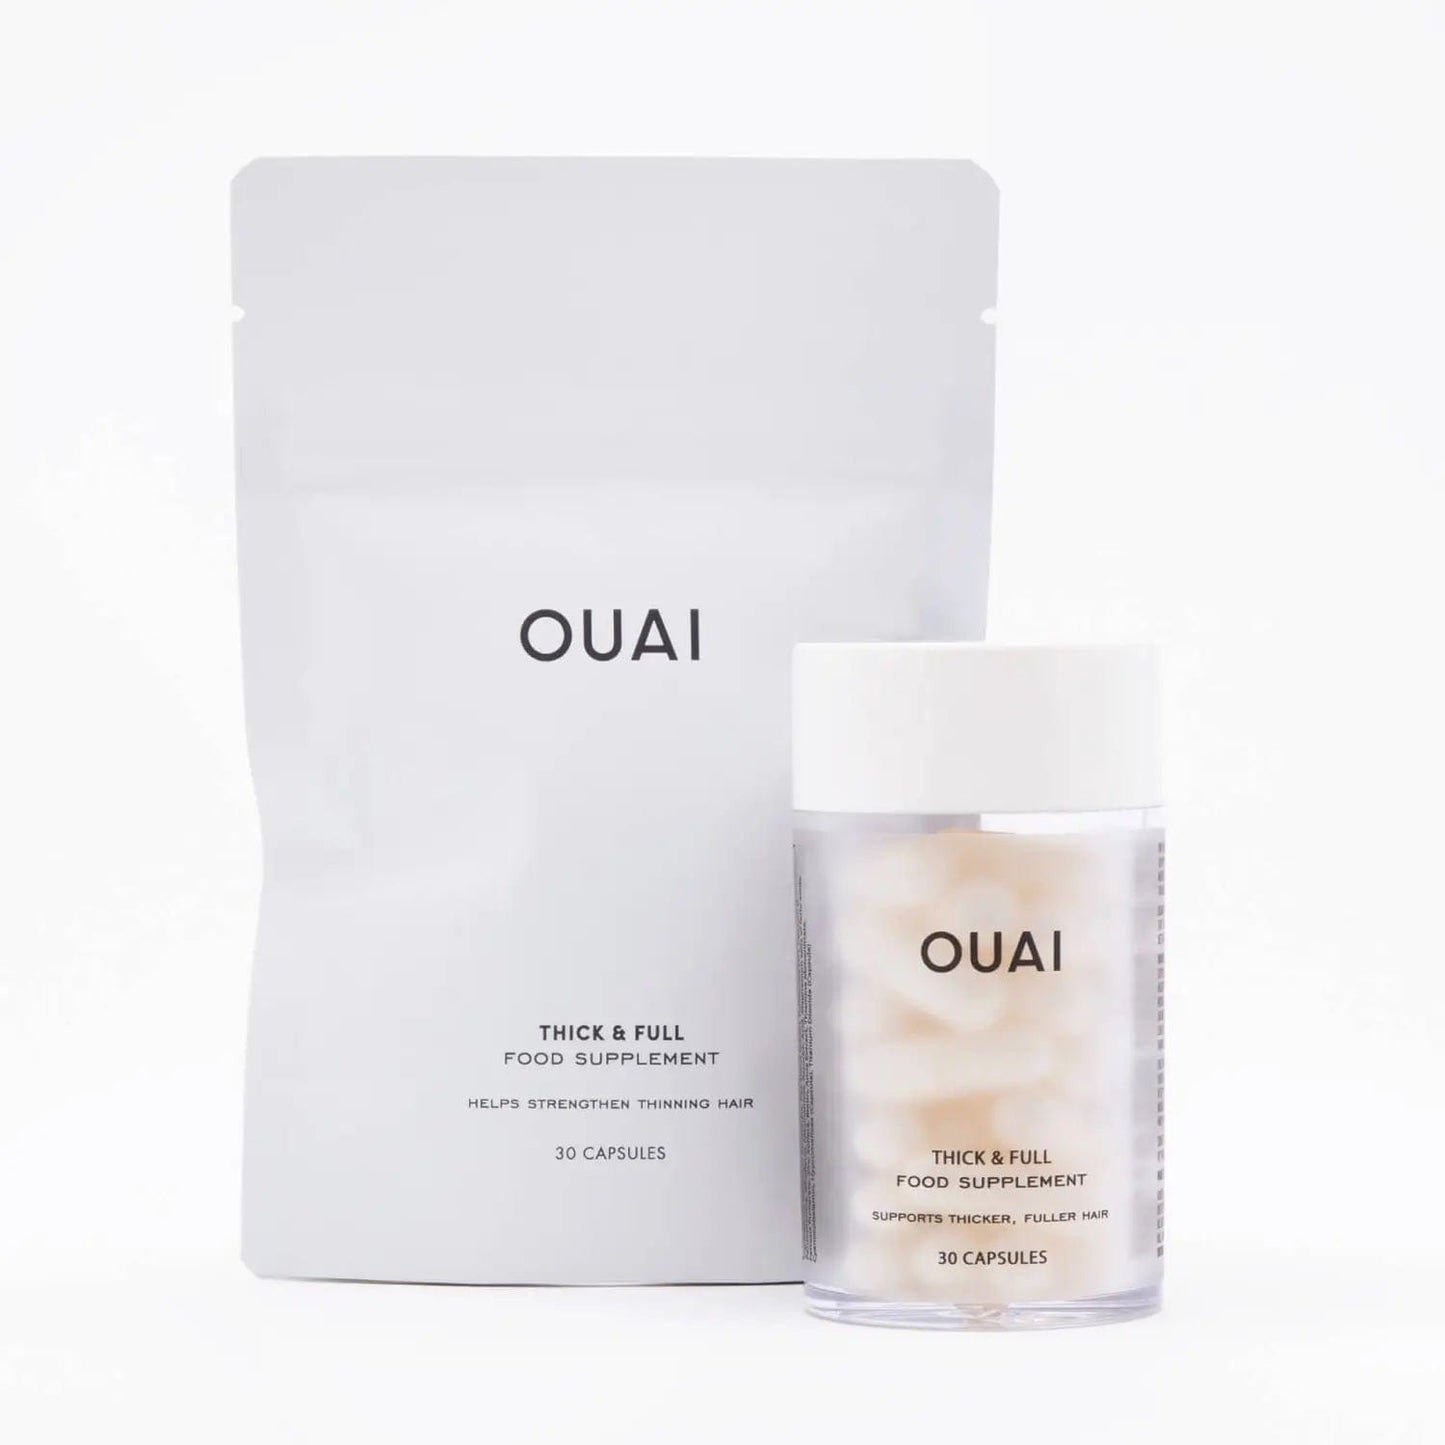 OUAI Beauty Ouai Thick And Full Supplements Refill (30 Capsules)